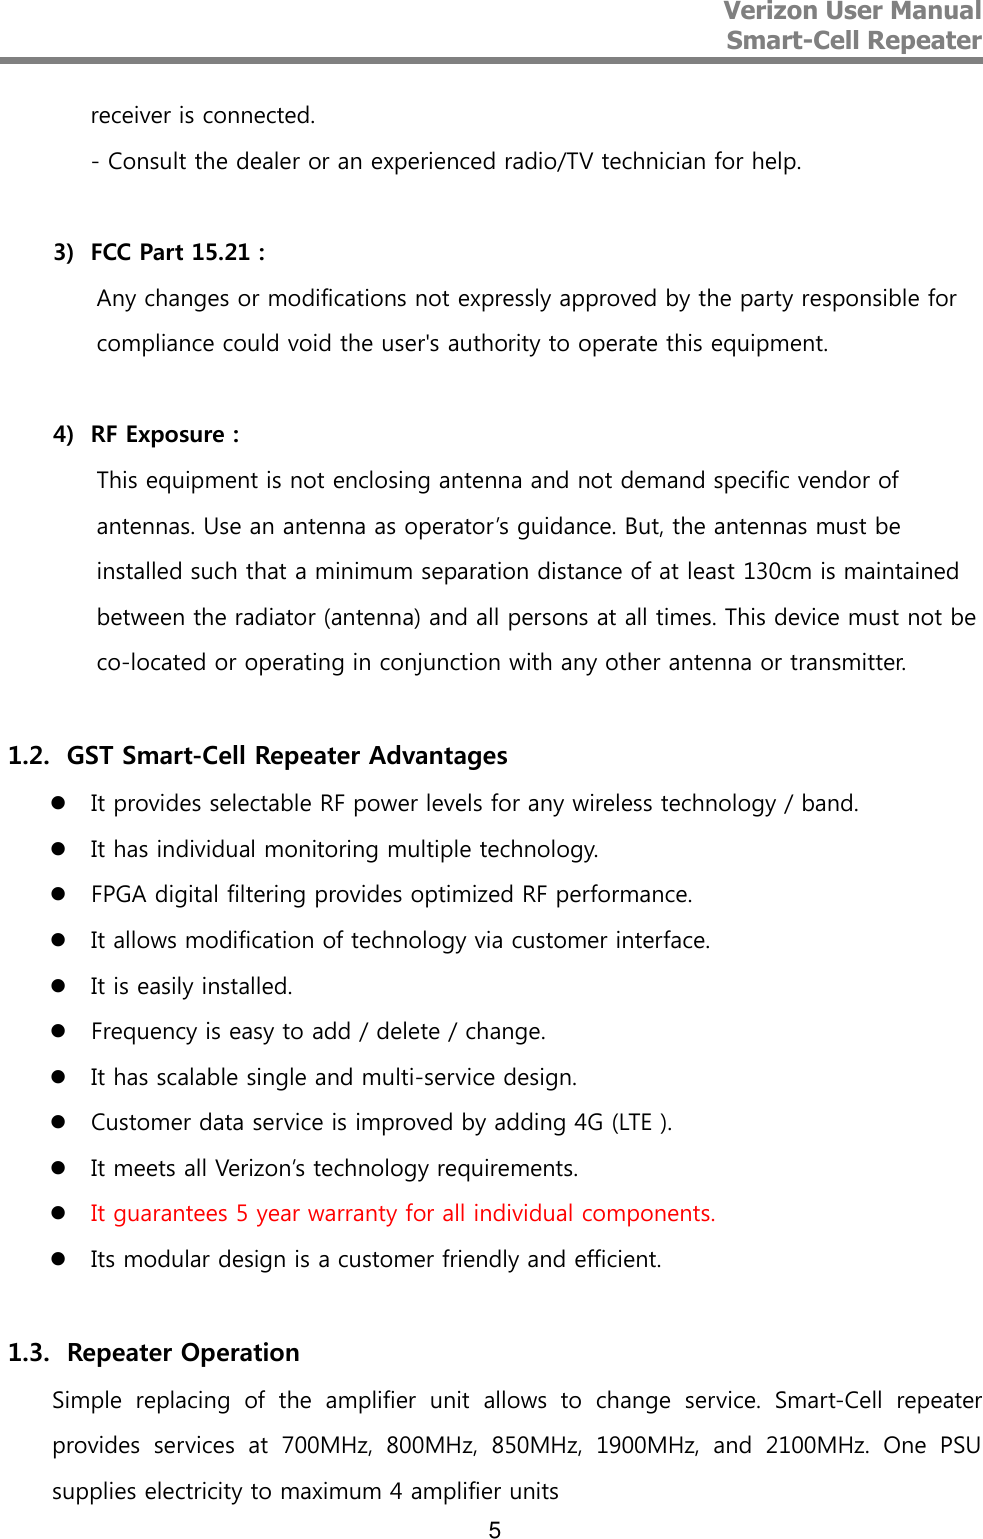 Verizon User Manual  Smart-Cell Repeater   5 receiver is connected.  - Consult the dealer or an experienced radio/TV technician for help.  3) FCC Part 15.21 : Any changes or modifications not expressly approved by the party responsible for compliance could void the user&apos;s authority to operate this equipment.  4) RF Exposure : This equipment is not enclosing antenna and not demand specific vendor of antennas. Use an antenna as operator’s guidance. But, the antennas must be installed such that a minimum separation distance of at least 130cm is maintained between the radiator (antenna) and all persons at all times. This device must not be co-located or operating in conjunction with any other antenna or transmitter.  1.2. GST Smart-Cell Repeater Advantages  It provides selectable RF power levels for any wireless technology / band.  It has individual monitoring multiple technology.  FPGA digital filtering provides optimized RF performance.  It allows modification of technology via customer interface.  It is easily installed.  Frequency is easy to add / delete / change.  It has scalable single and multi-service design.  Customer data service is improved by adding 4G (LTE ).  It meets all Verizon’s technology requirements.  It guarantees 5 year warranty for all individual components.  Its modular design is a customer friendly and efficient.  1.3. Repeater Operation Simple  replacing  of  the  amplifier  unit  allows  to  change  service.  Smart-Cell  repeater provides  services  at  700MHz,  800MHz,  850MHz,  1900MHz,  and  2100MHz.  One  PSU supplies electricity to maximum 4 amplifier units 